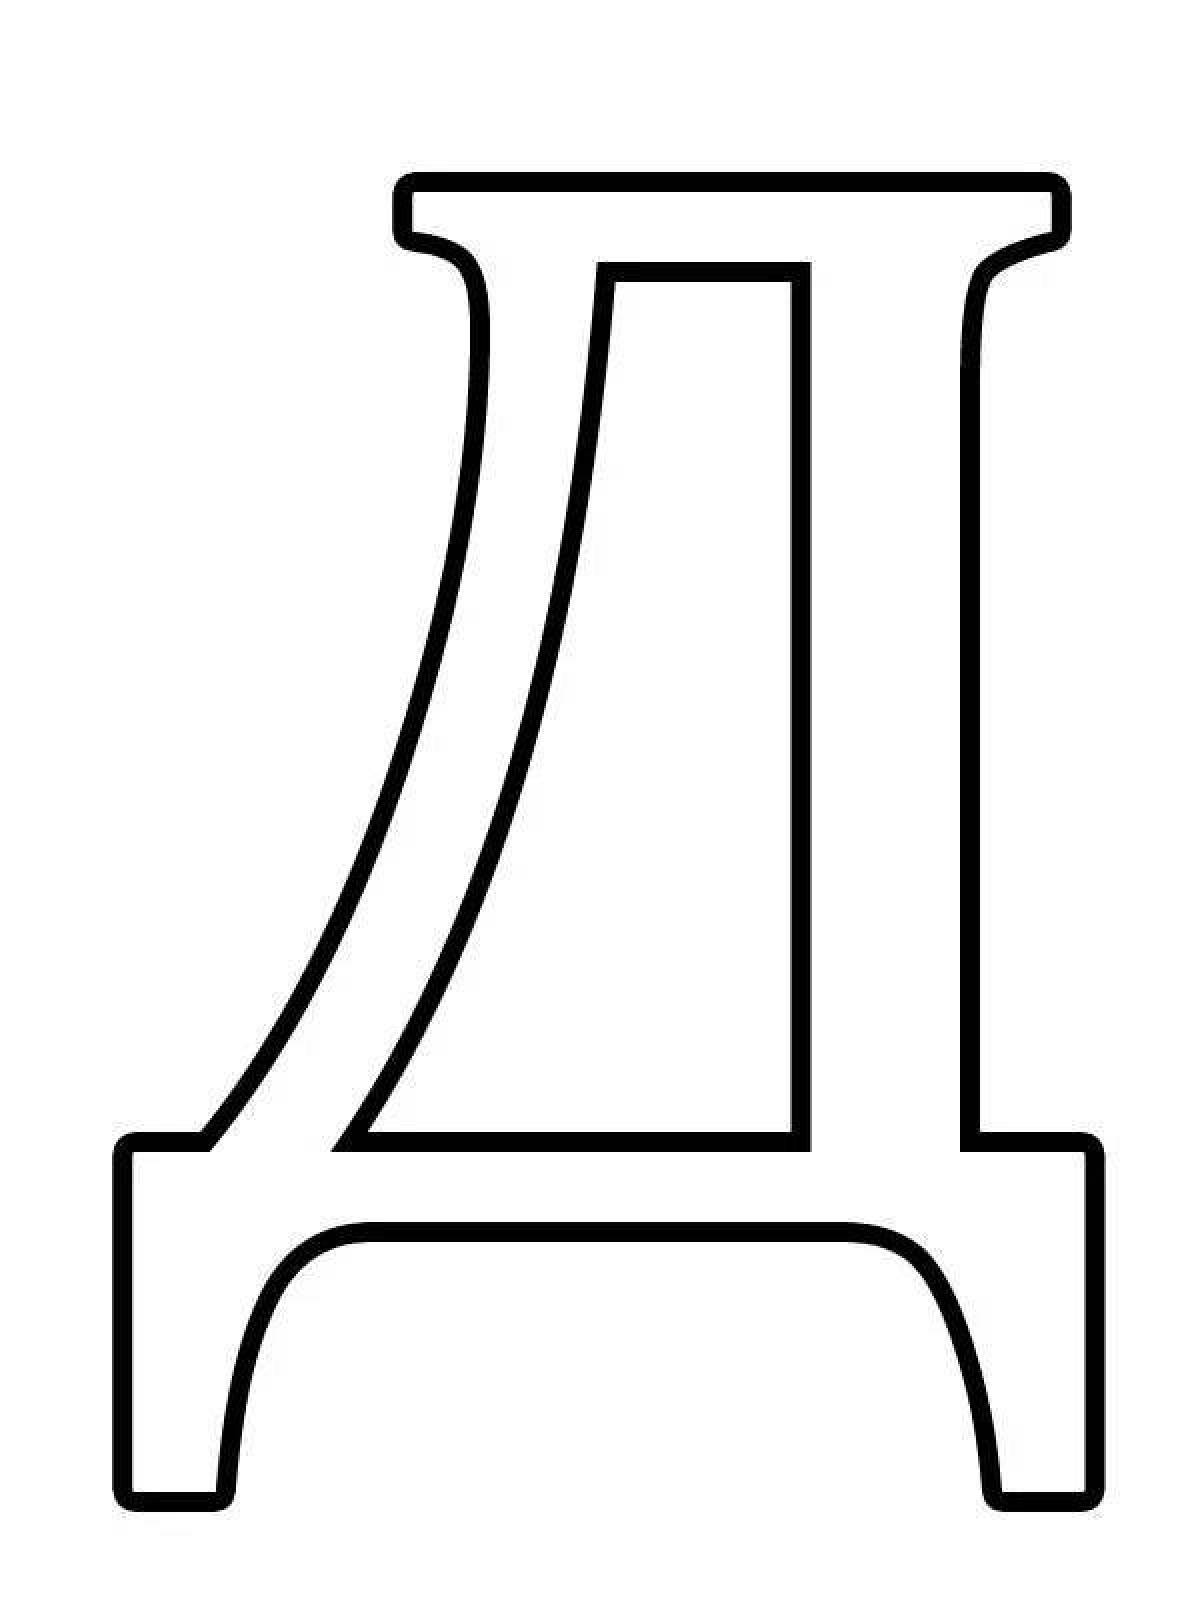 Inviting coloring pages of the letters of the Russian alphabet separately